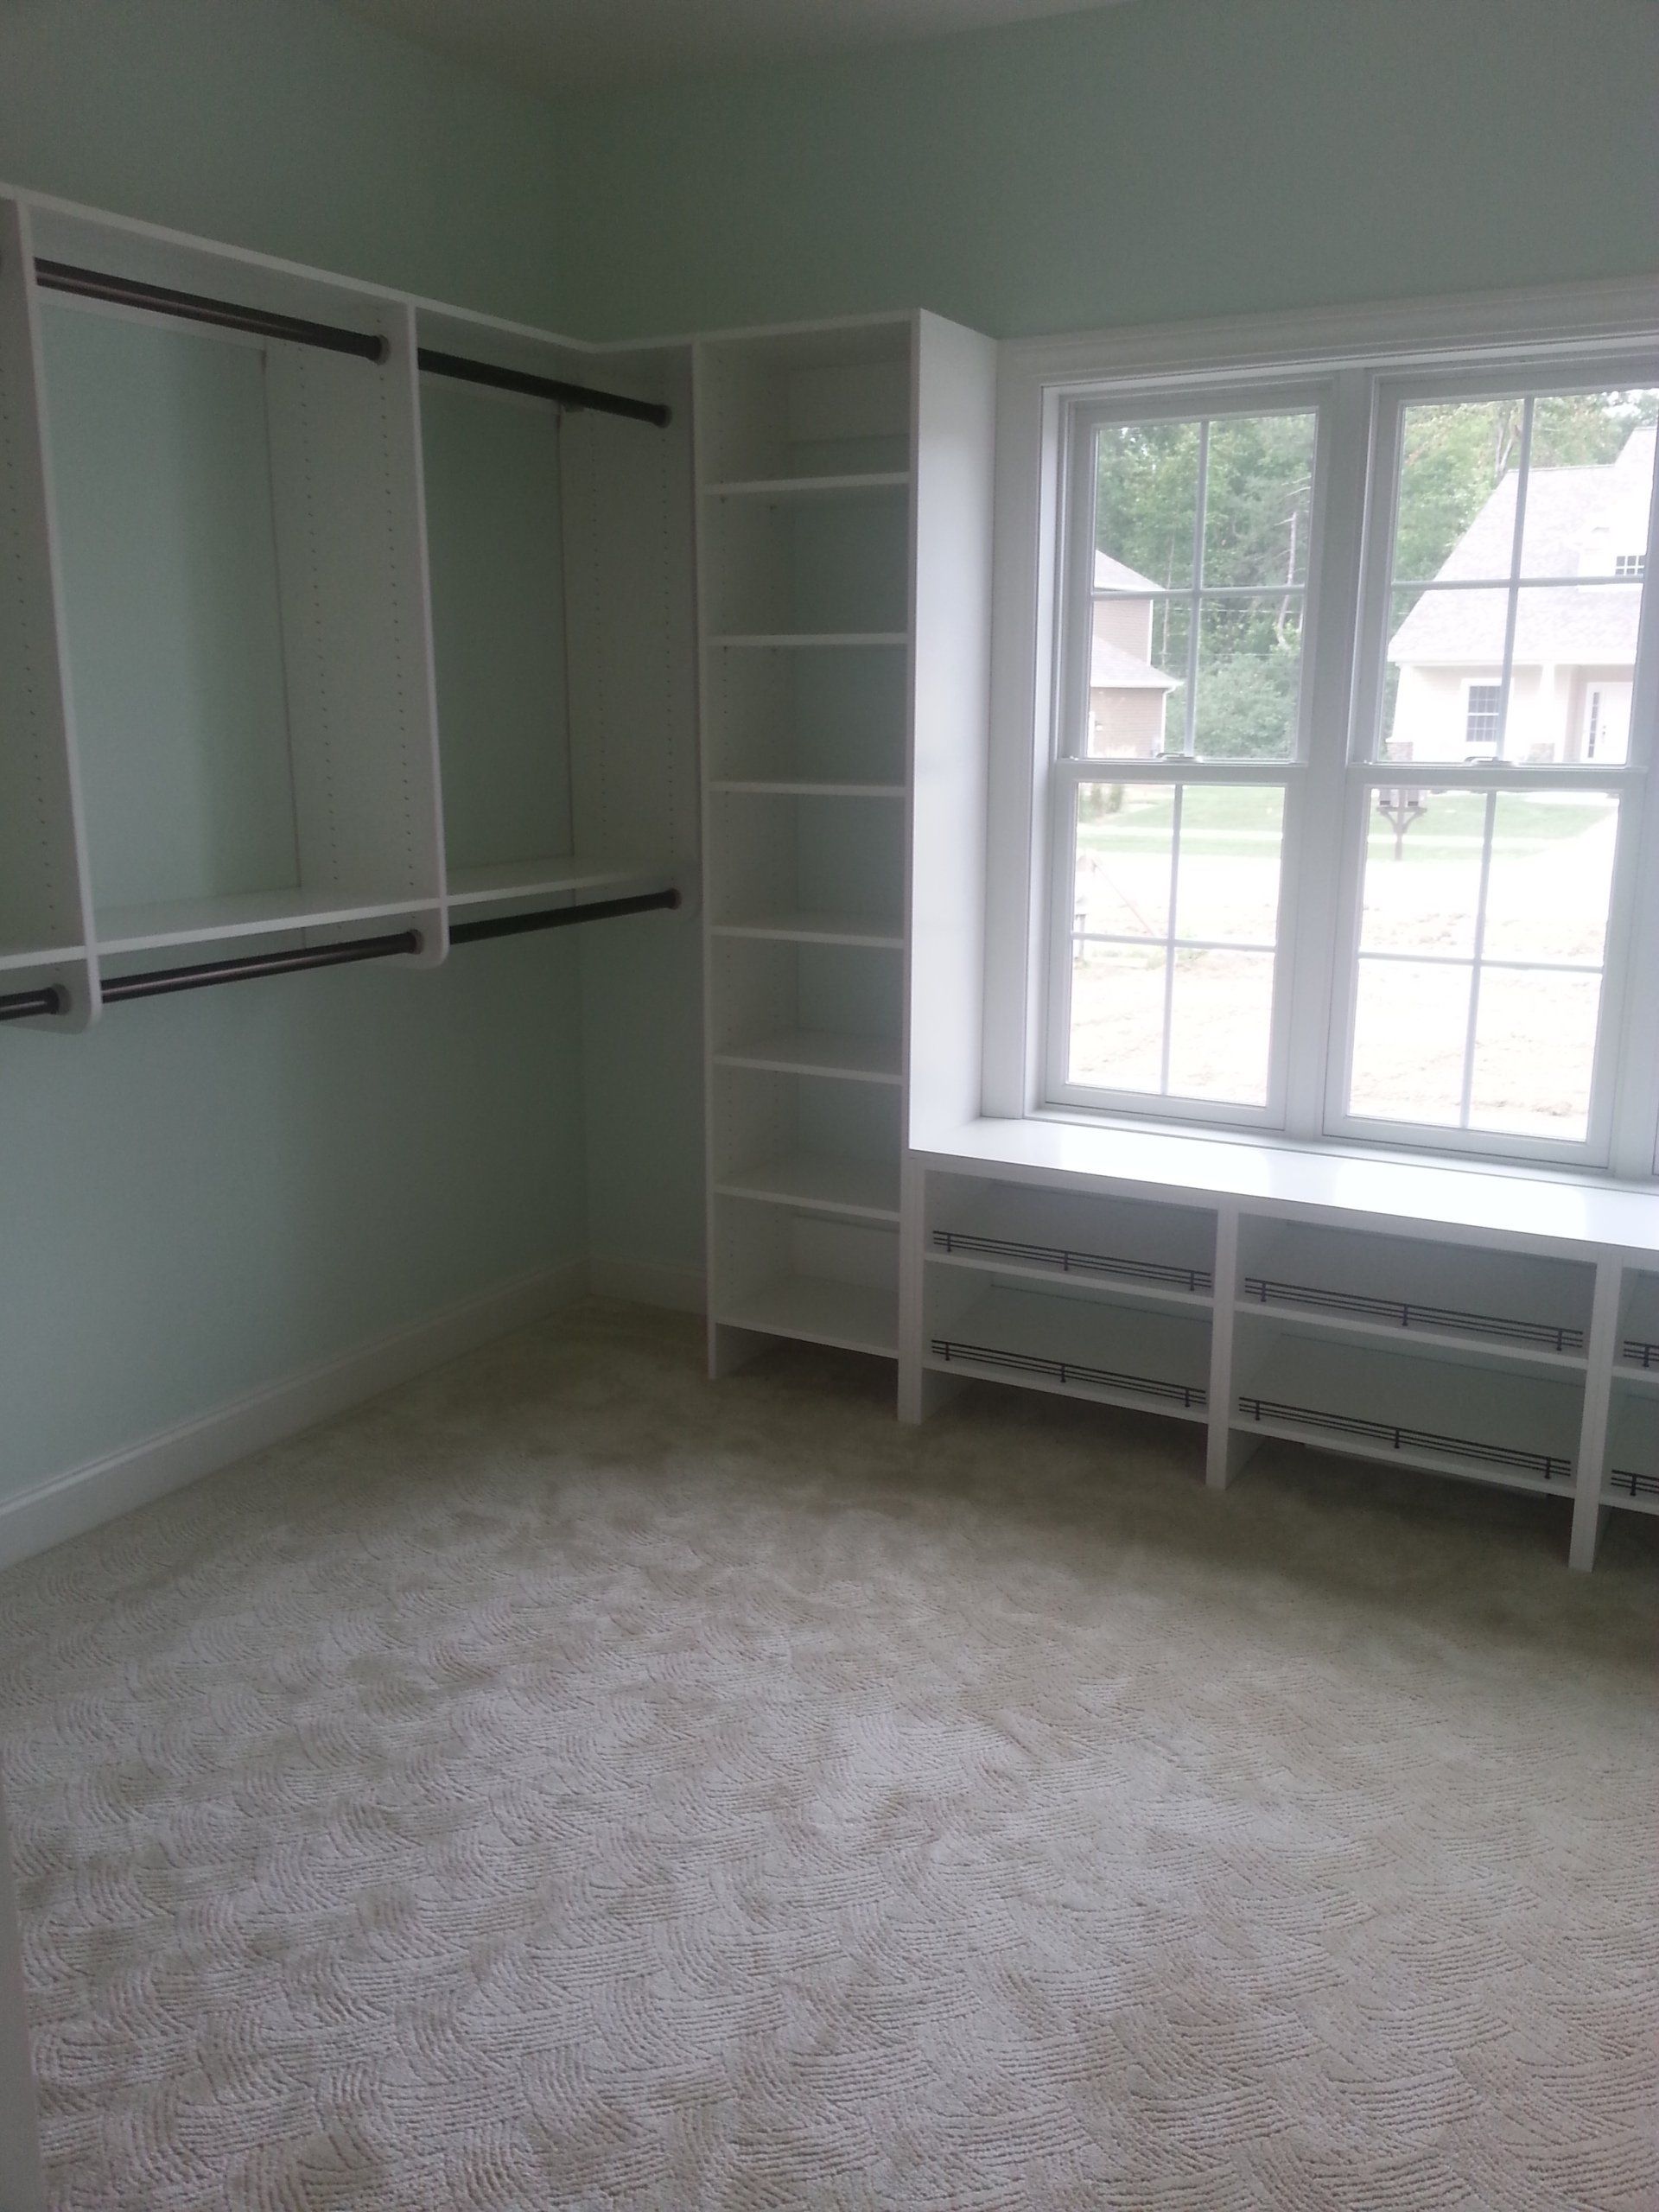 Cabinets and window — Closets & Closet Accessories in Erie, PA